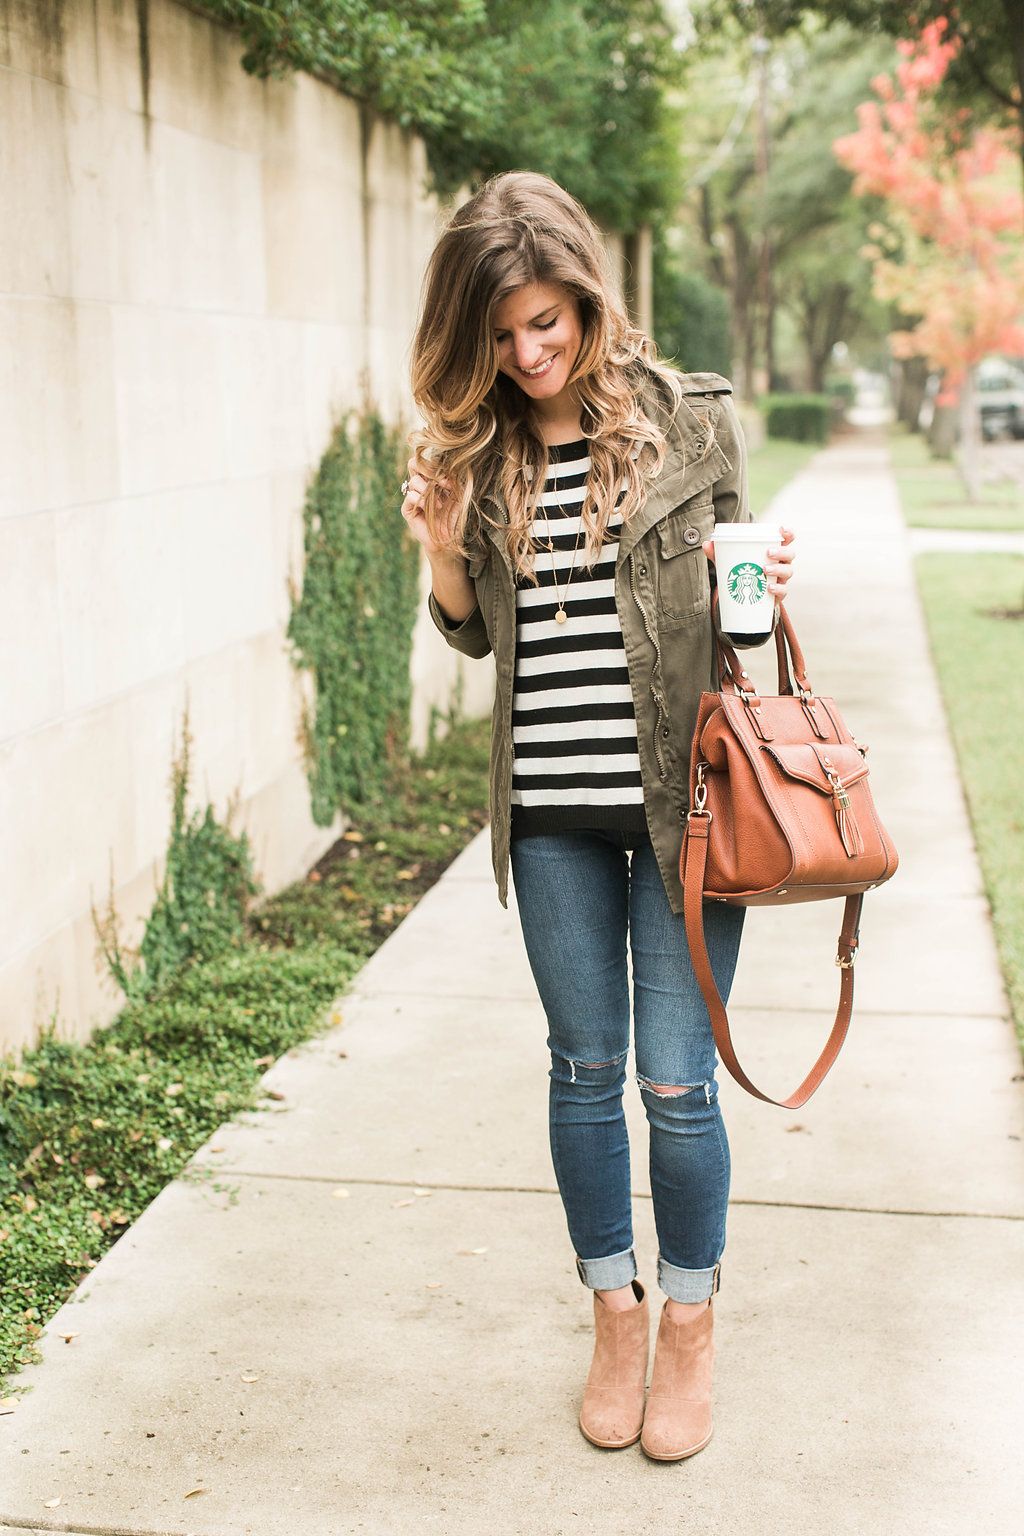 Simple & Cute Fall Outfit Idea – Stripes + Cognac + Green Military Jacket